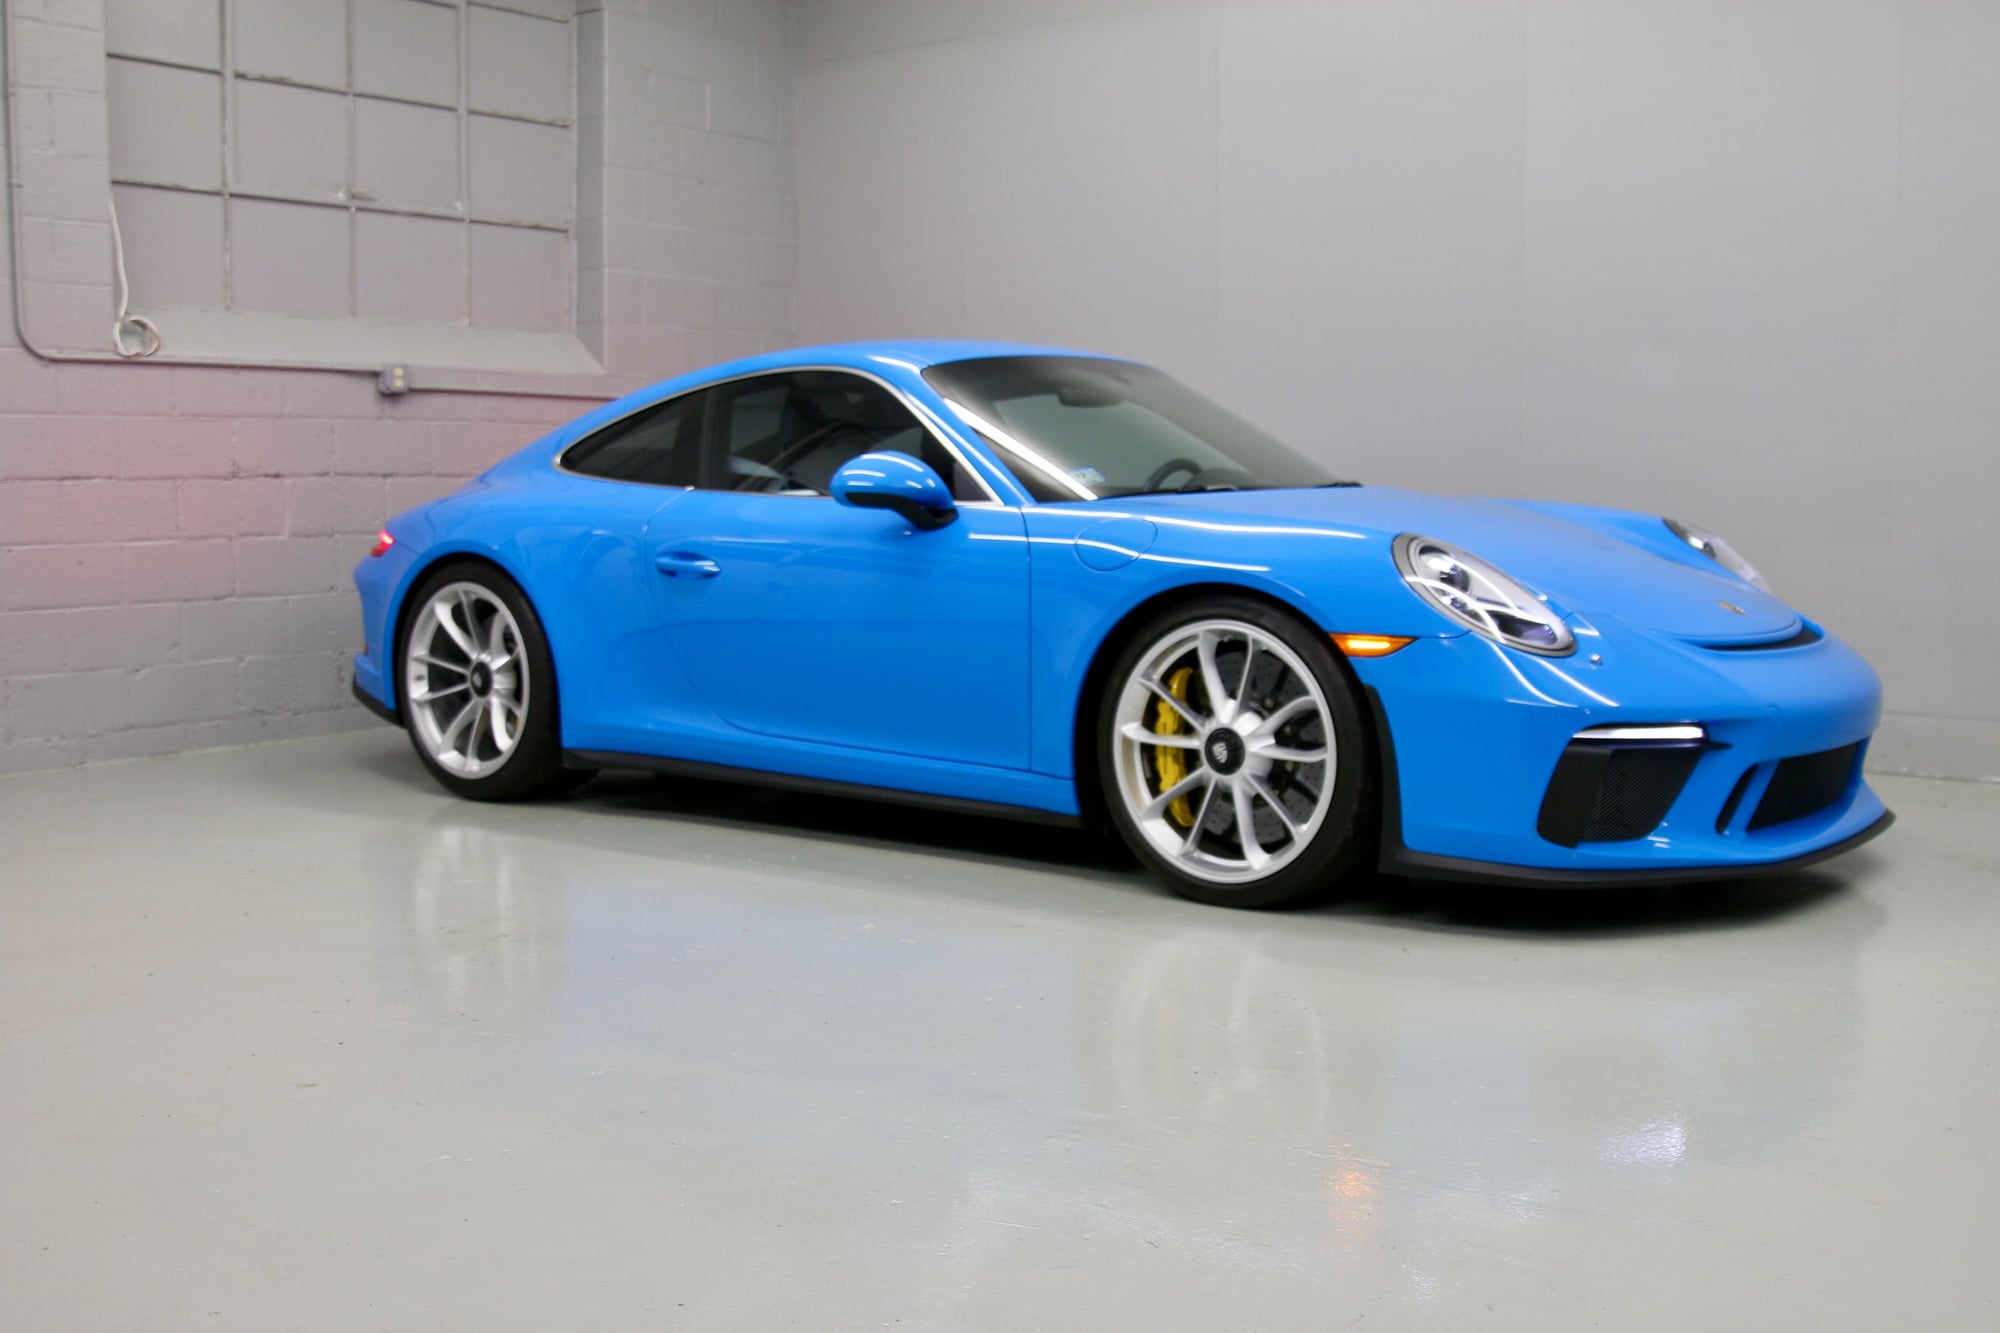 2018 Porsche GT3 - 2018 GT3 Touring PTS Mexico Blue - Used - VIN WP0AC2A90JS176153 - 6,750 Miles - 6 cyl - 2WD - Manual - Coupe - Blue - Boston, MA 02110, United States